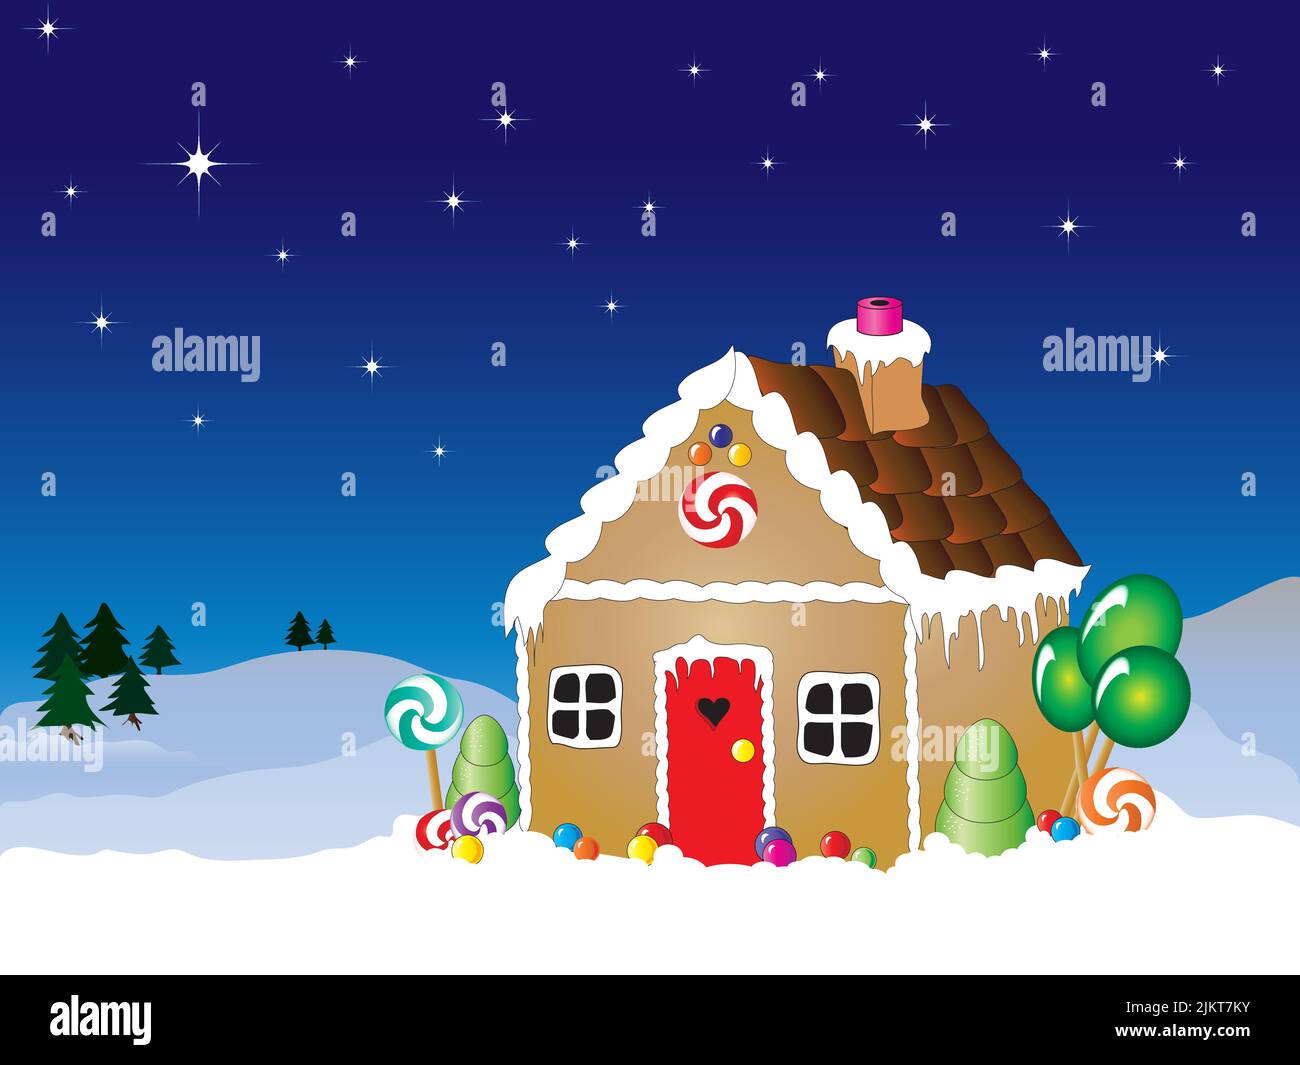 Vector illustration of a gingerbread house snow scene with star filled sky. Stock Vector